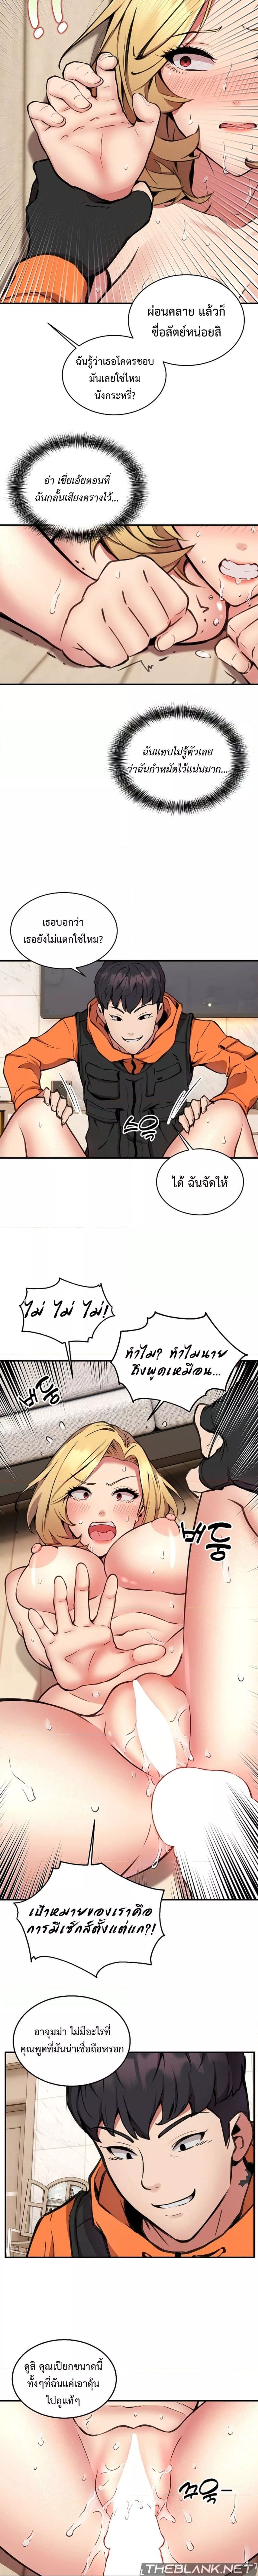 Driver in the New City ตอนที่ 6 ภาพ 1